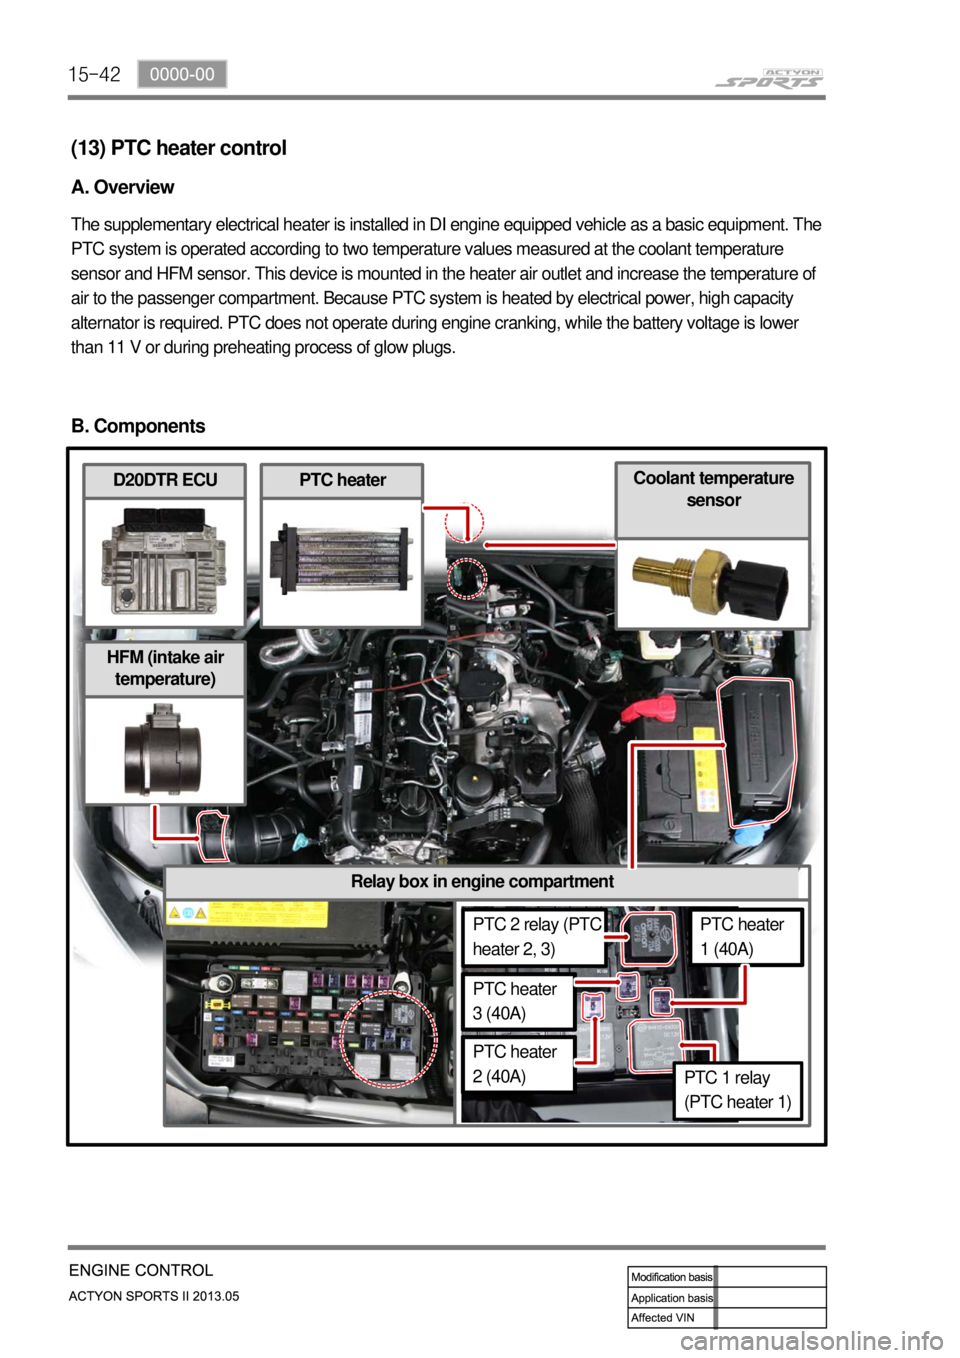 SSANGYONG NEW ACTYON SPORTS 2013  Service Manual 15-42
Relay box in engine compartment
(13) PTC heater control
A. Overview
The supplementary electrical heater is installed in DI engine equipped vehicle as a basic equipment. The 
PTC system is operat